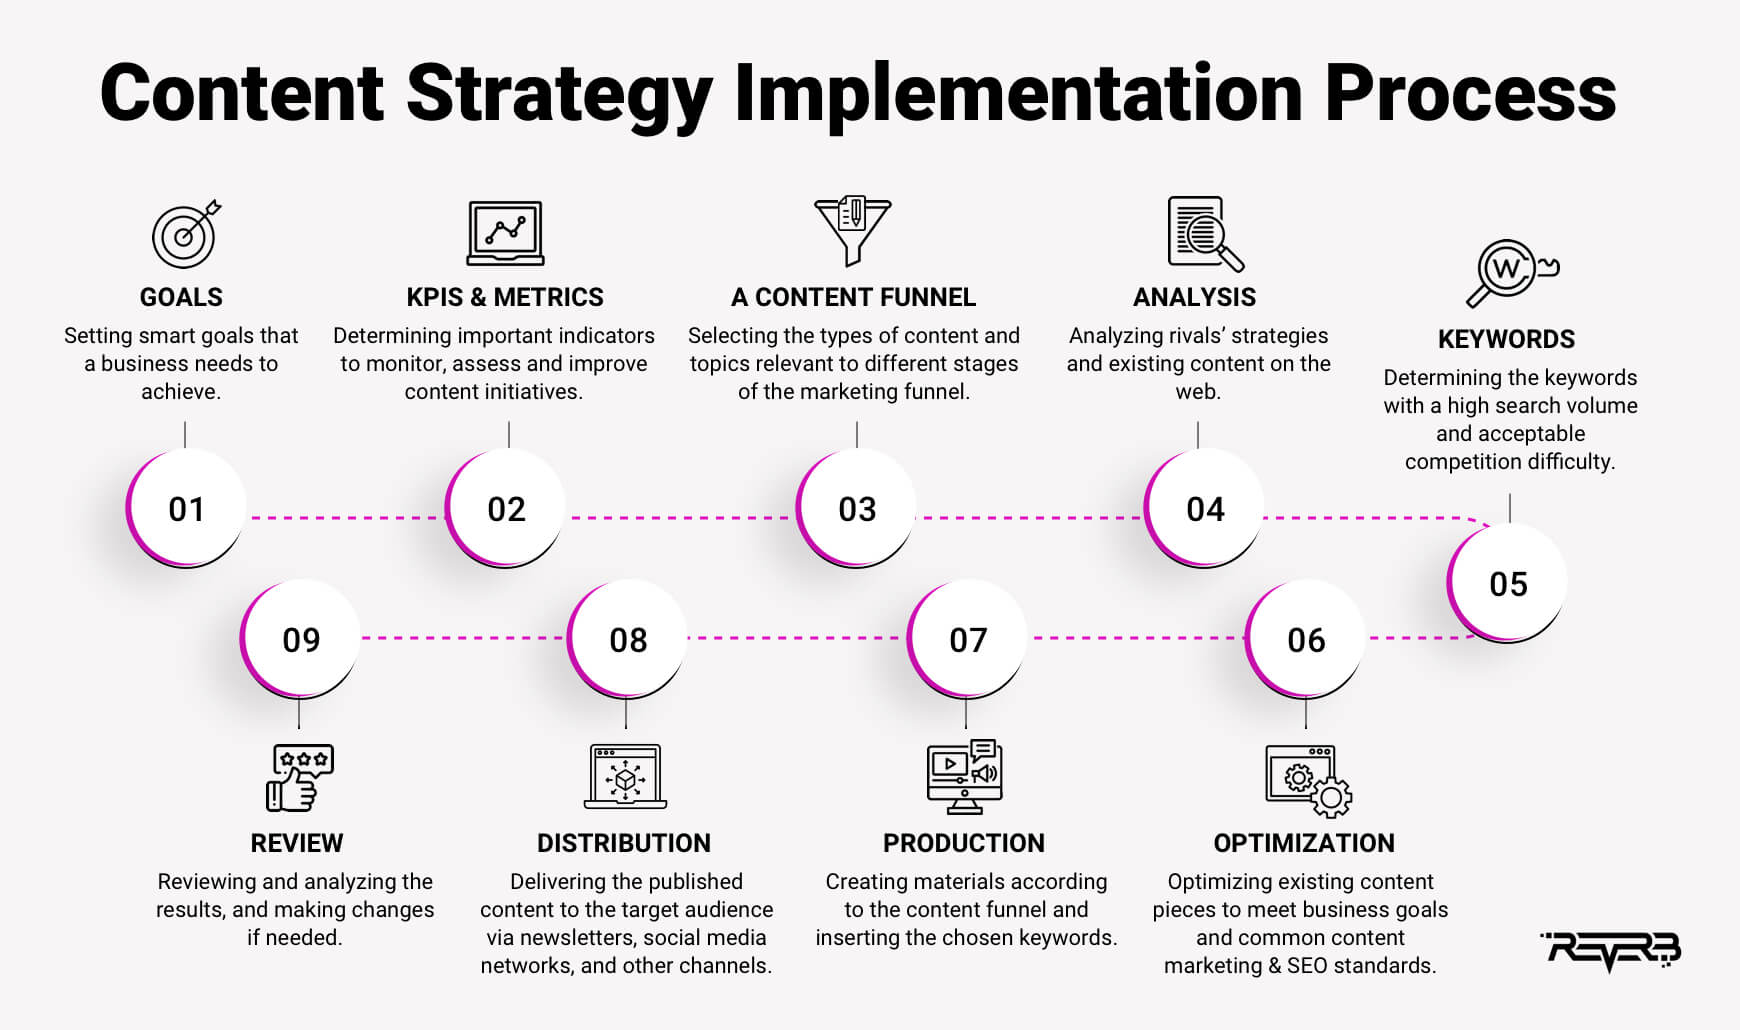 Content Strategy Implementation Process